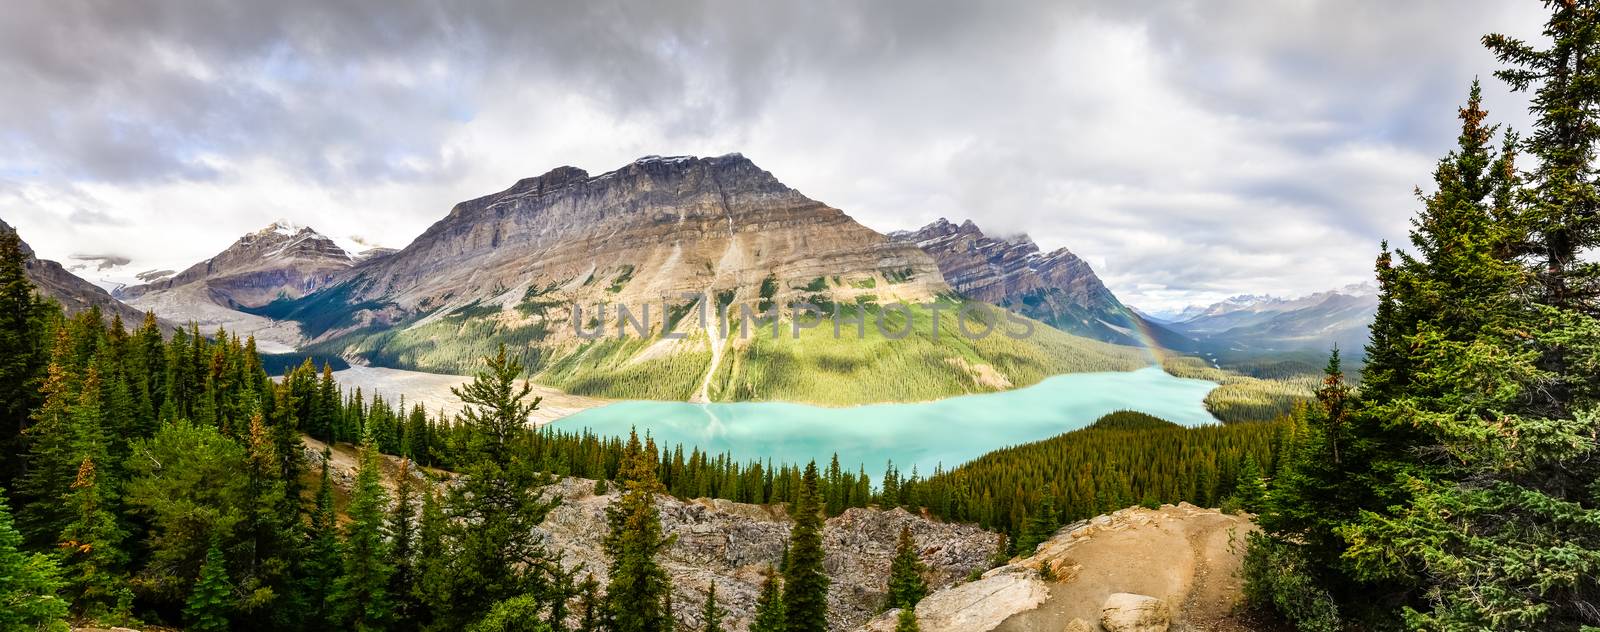 Panoramic view of Peyto lake and Rocky mountains, Alberta by martinm303